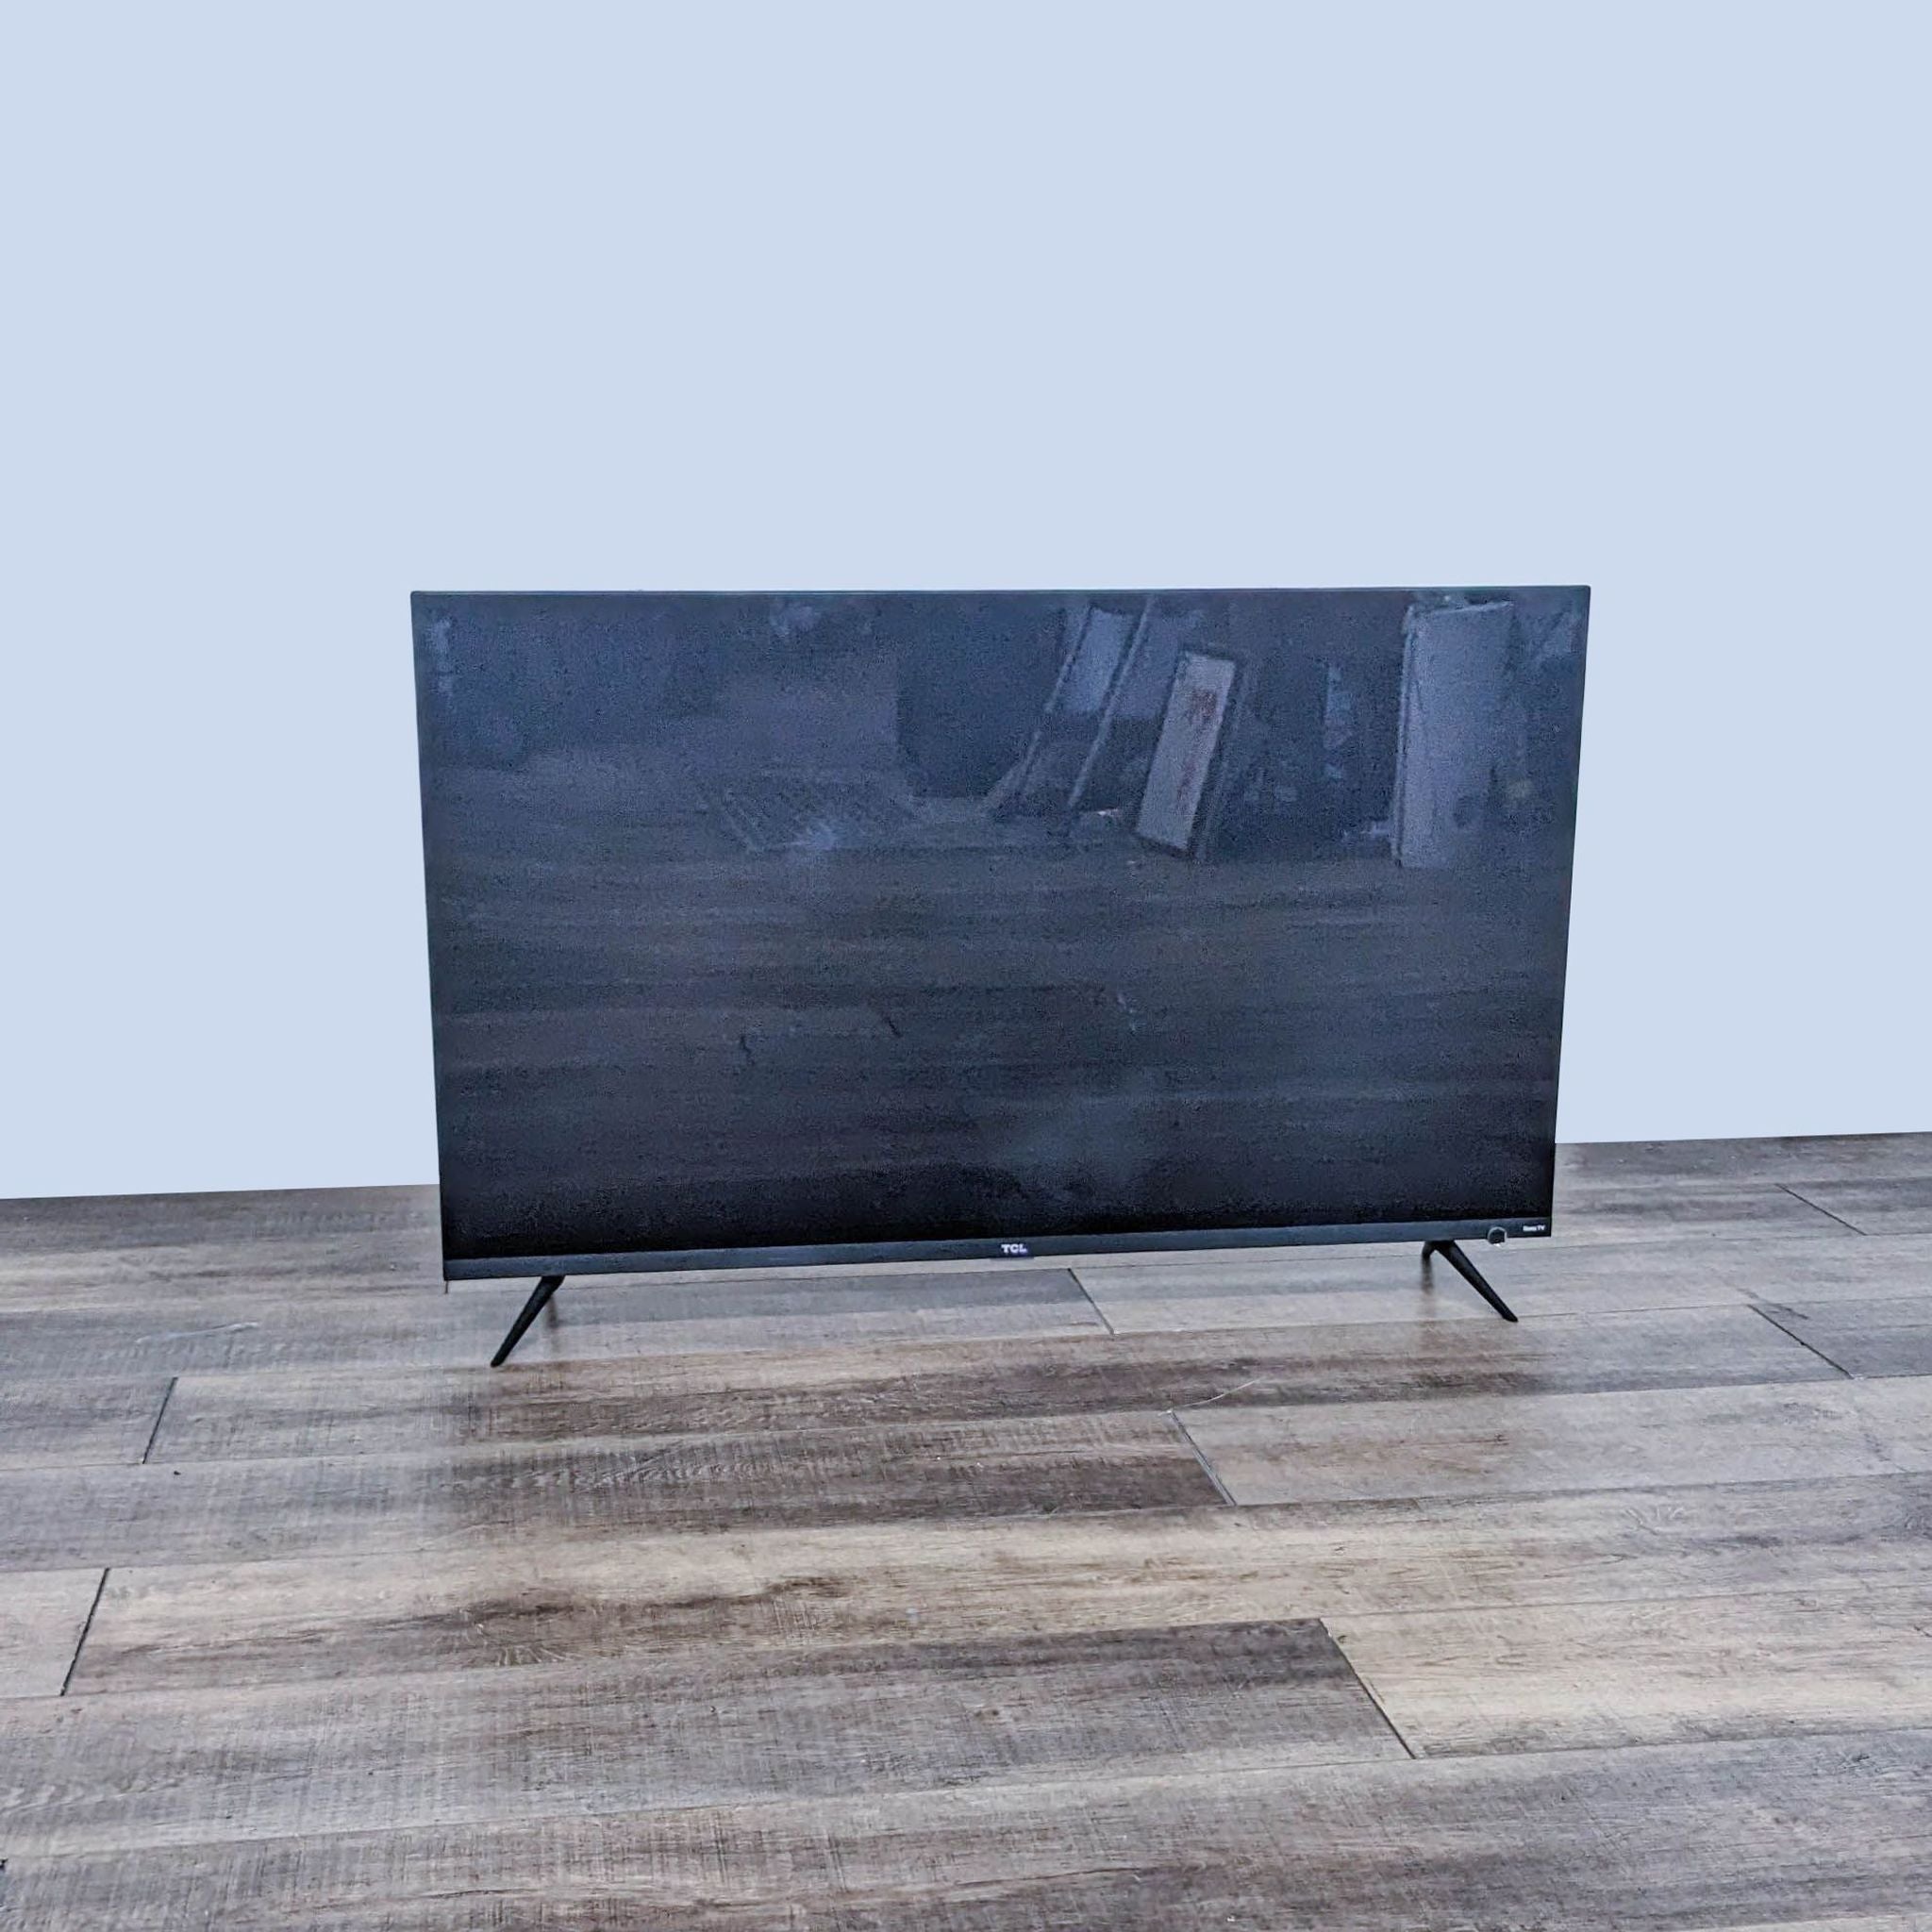 TCL television displayed in a frontal view, turned off, on a wooden floor against a grey wall.